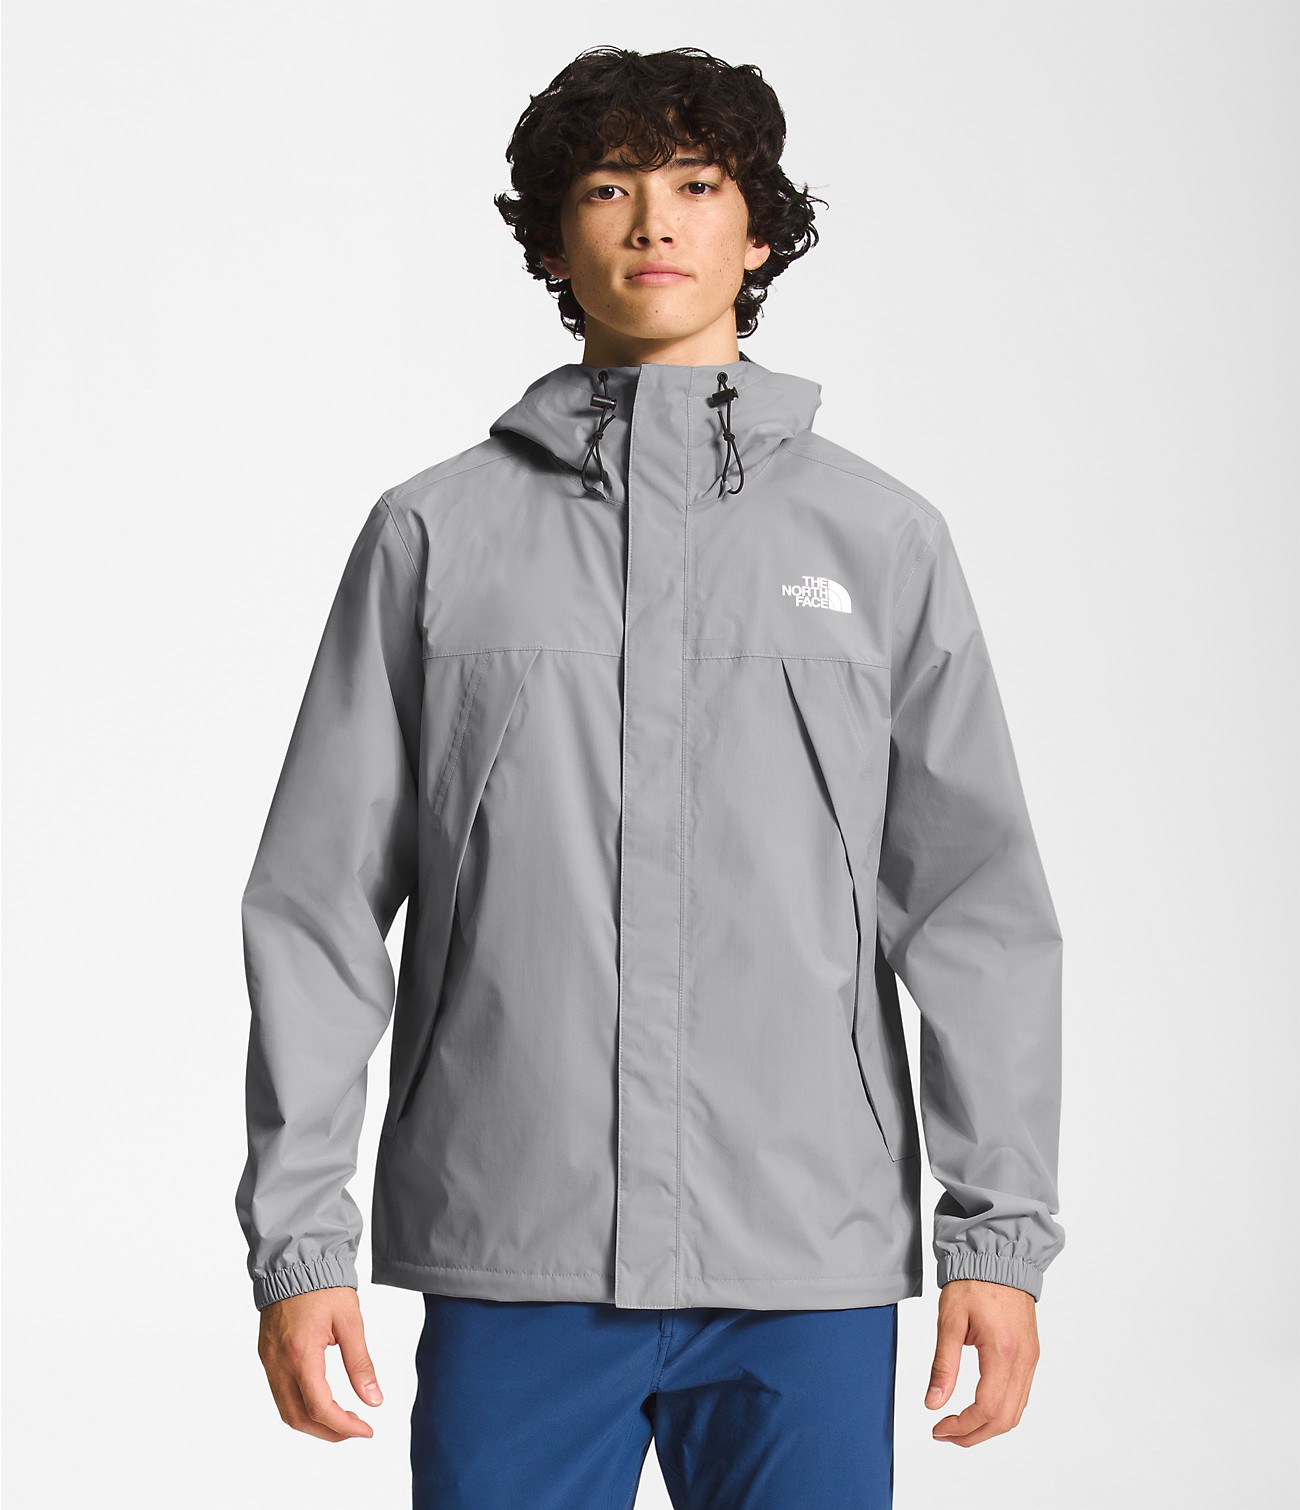 Unlock Wilderness' choice in the North Face Vs Quecha comparison, the Antora Jacket by The North Face